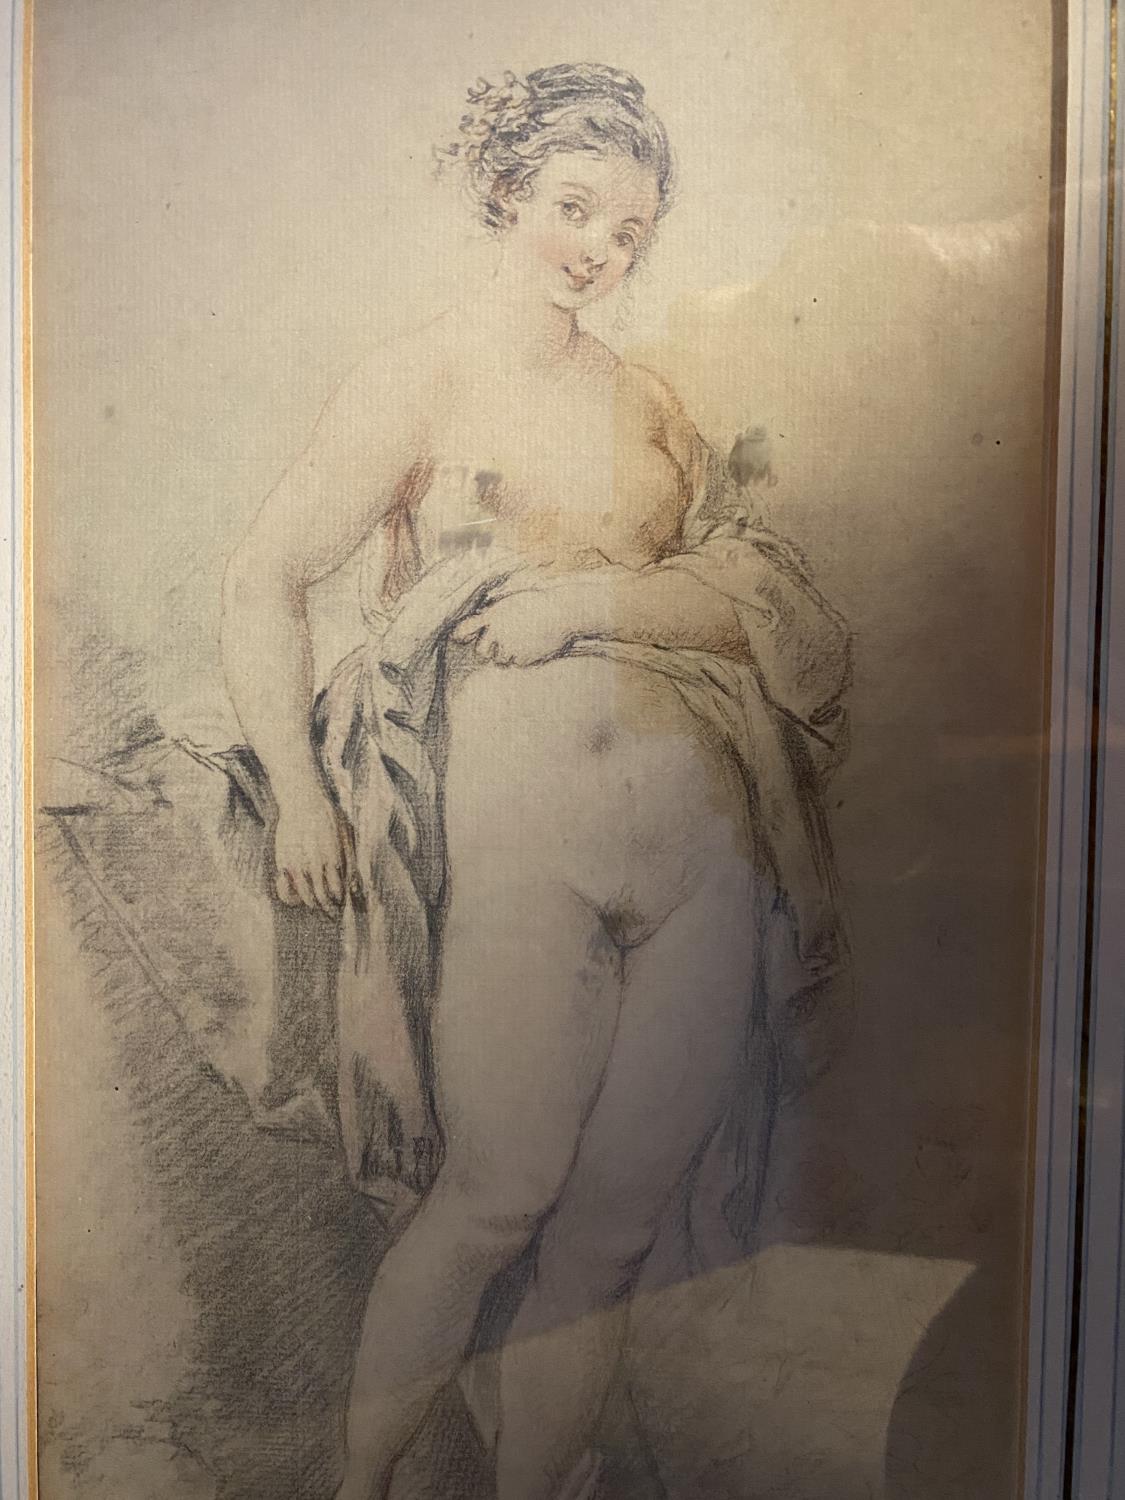 After Francois Boucher, two Limited edition Italian engravings, "Portrait, nude ladies" label - Image 7 of 7